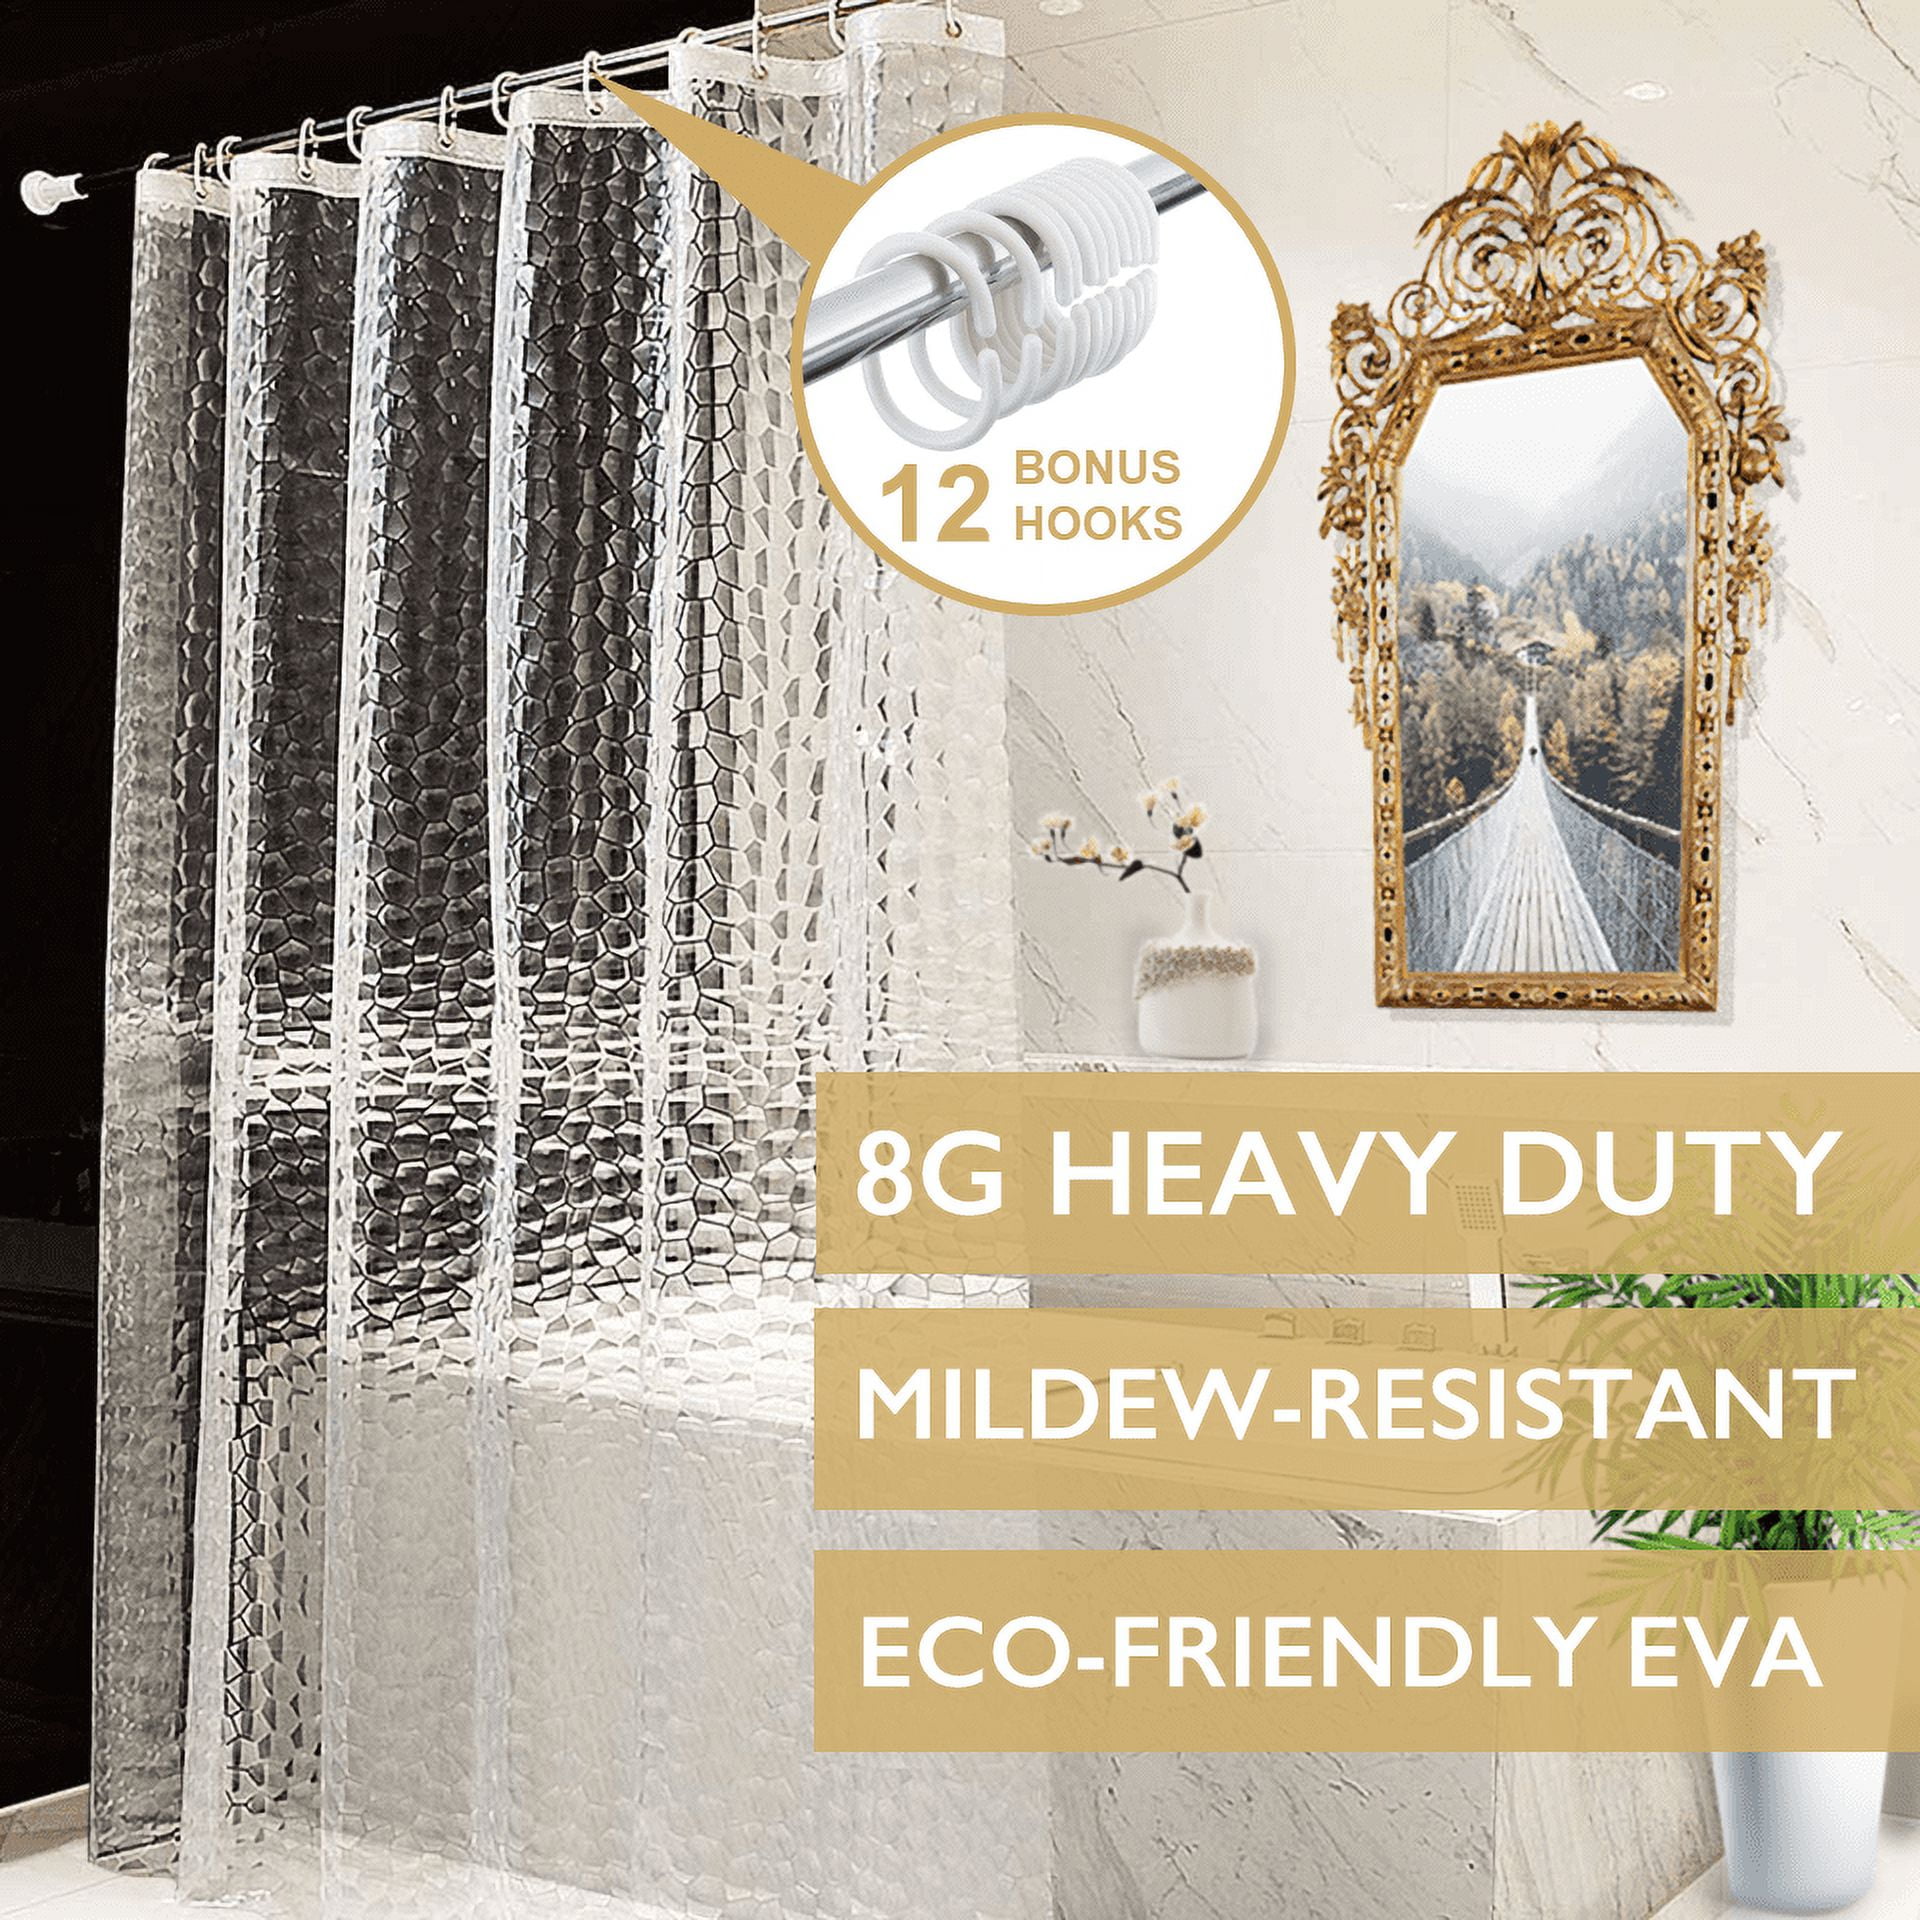 ComfiTime Clear Shower Curtain Liner  8G Heavy-Duty Mildew/Mold-Resistant Shower  Liner with Weighted Magnets, 100% EVA Vinyl, Rustproof Brass Grommets, 12  Bonus Hooks, Waterproof, 72 x 72, Clear 